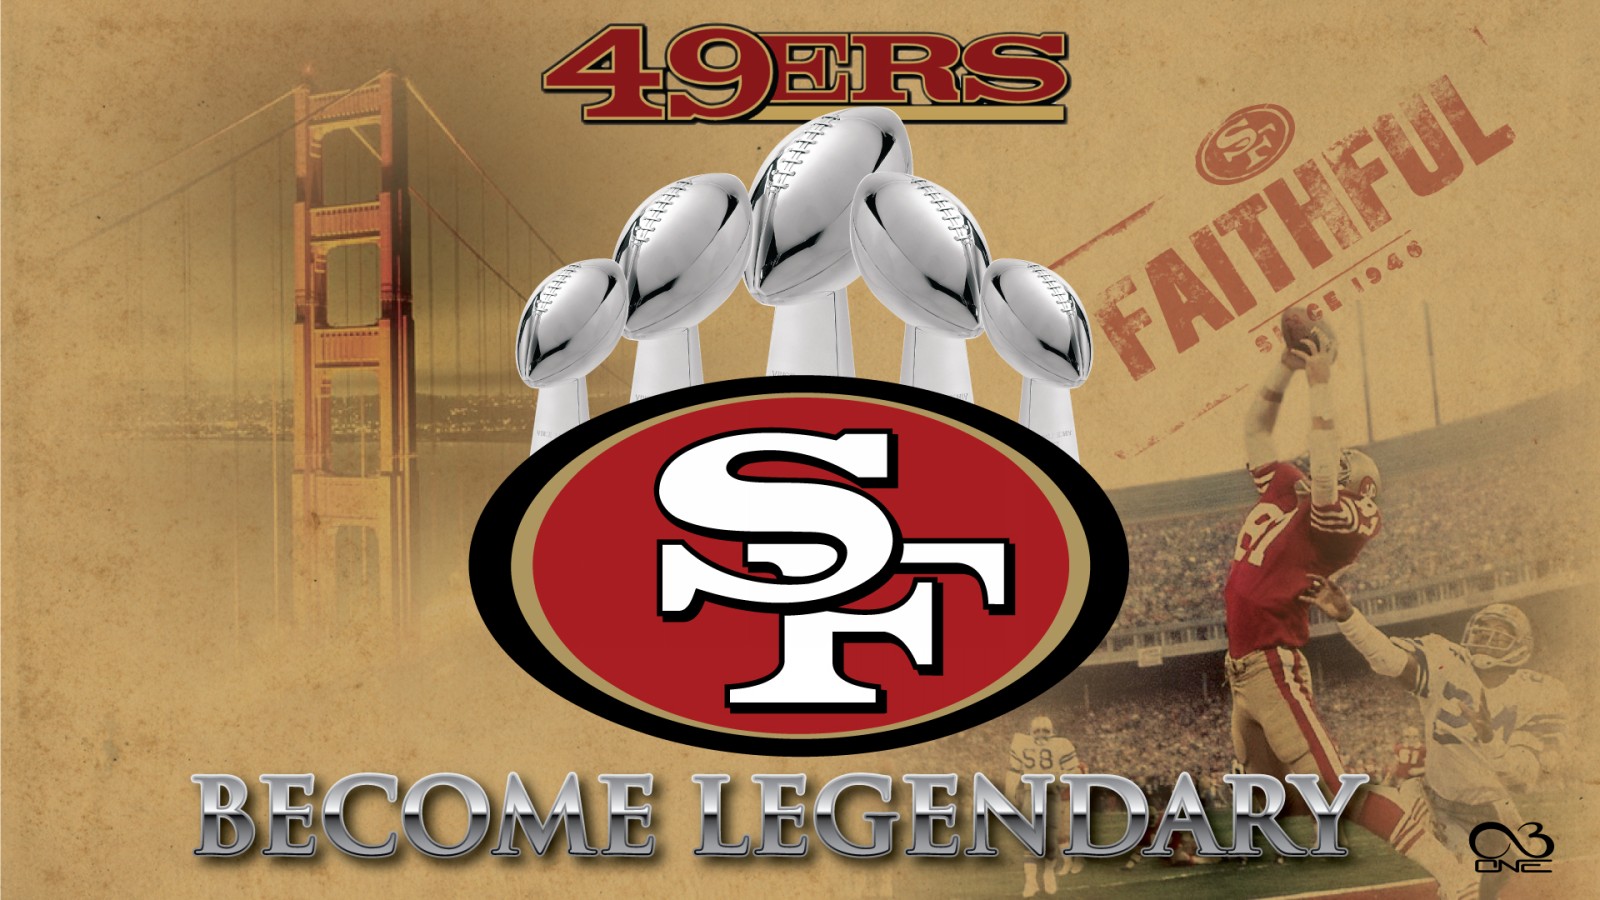  this San Francisco 49ers wallpaper HD background as much as we do